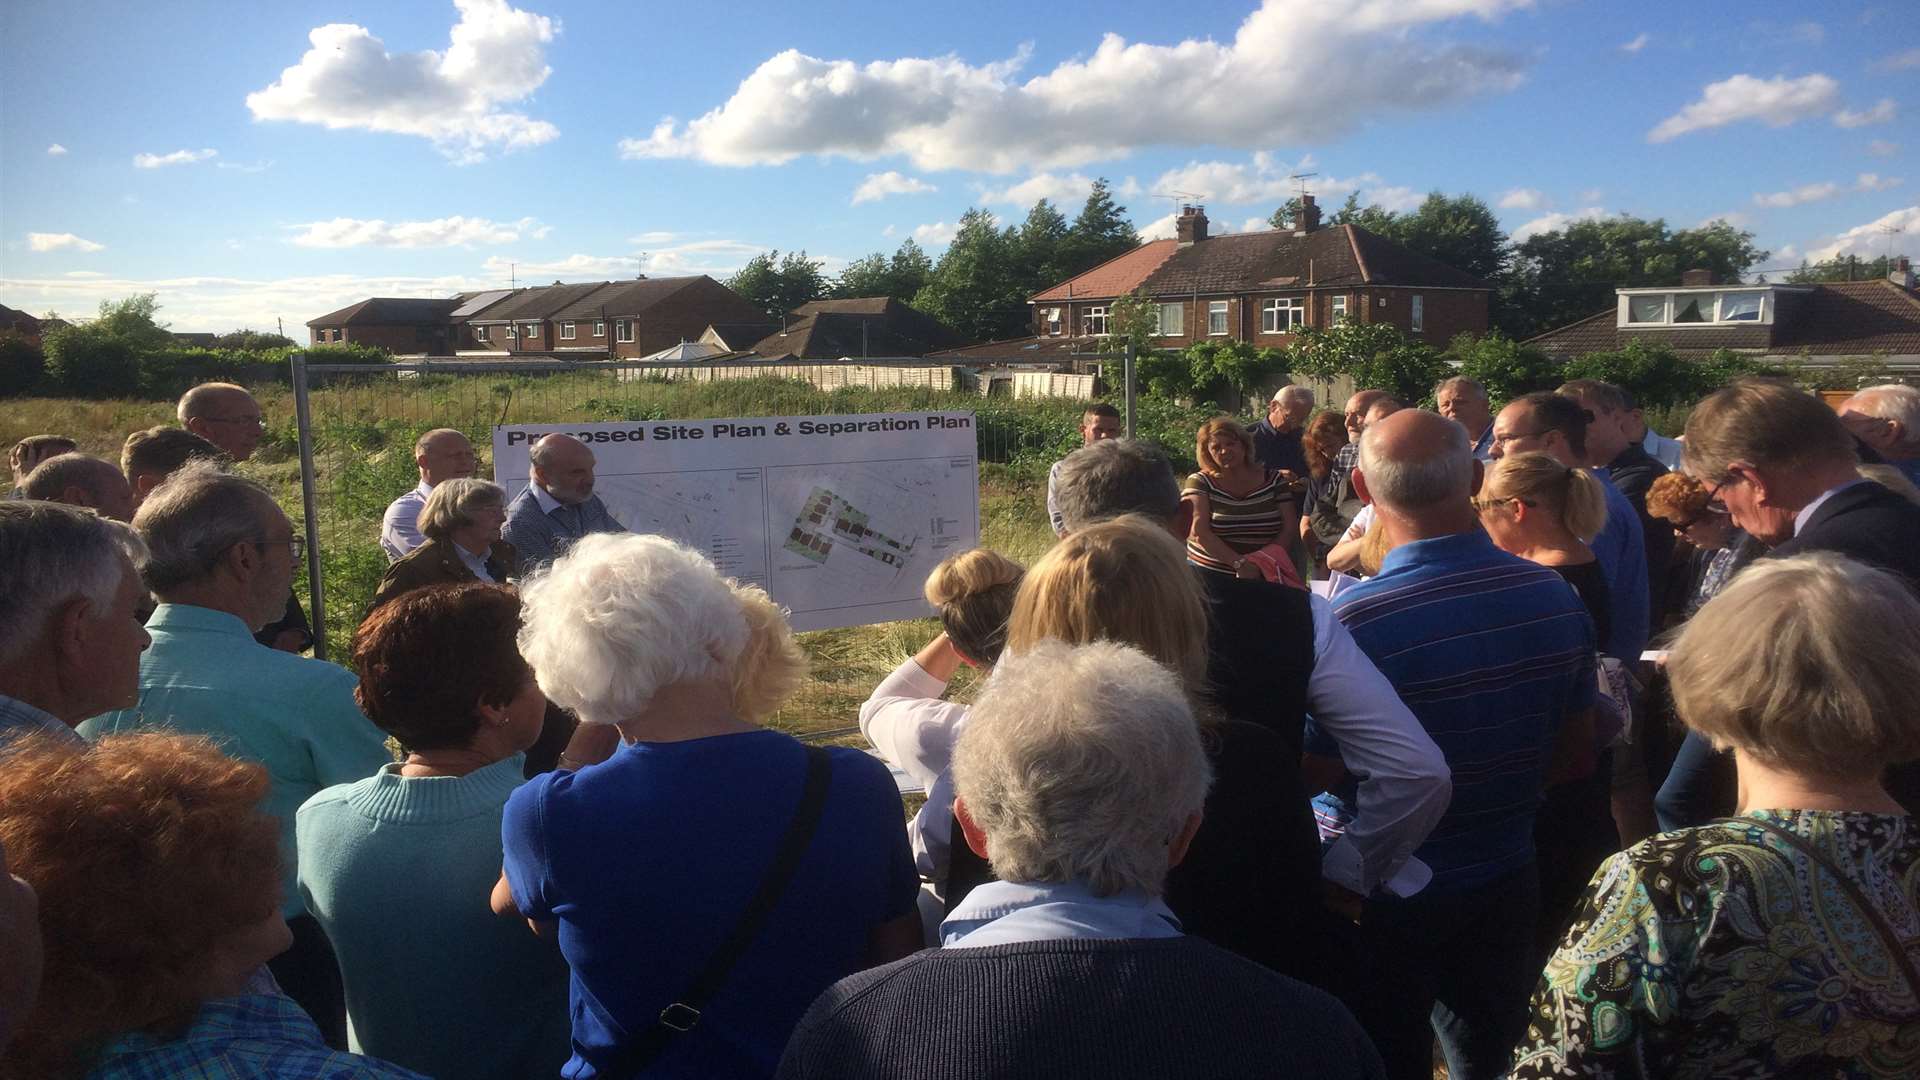 Residents gathered to show anger at plans for a housing development on Berengrave Lane